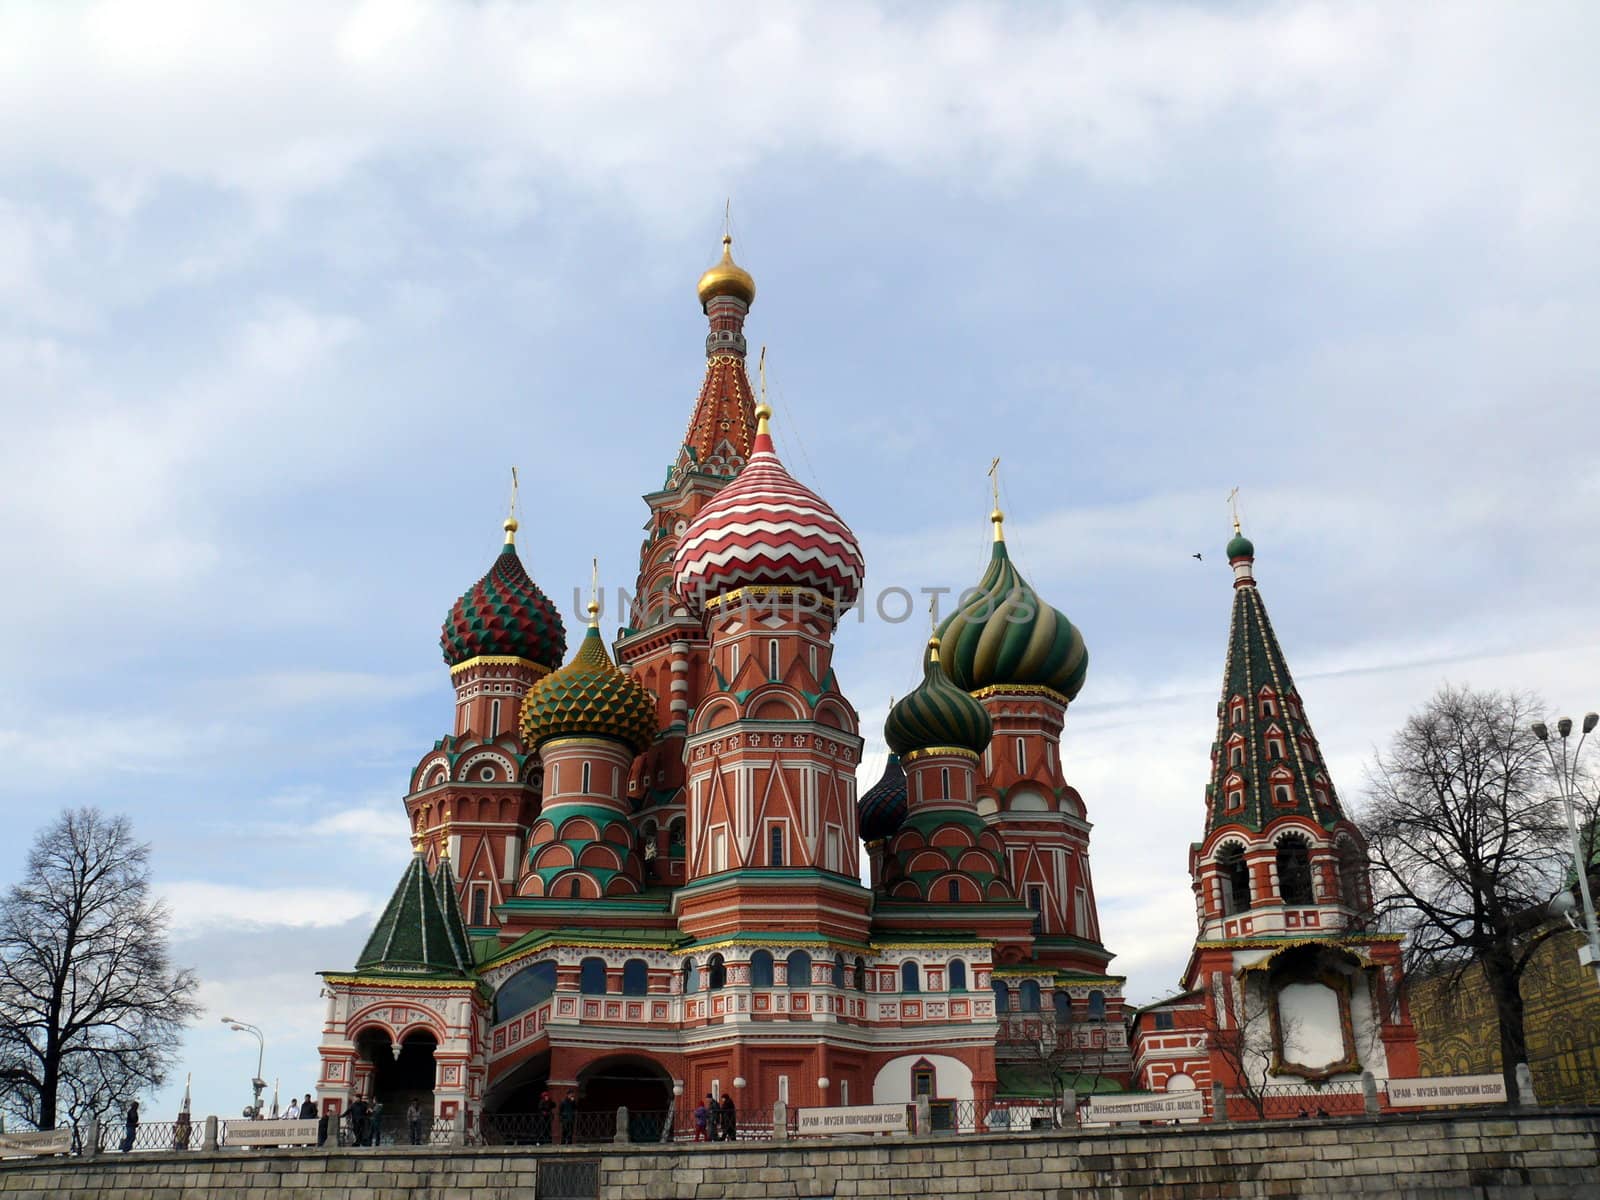 Saint Basil's Cathedral in Moscow, Russia by Stoyanov